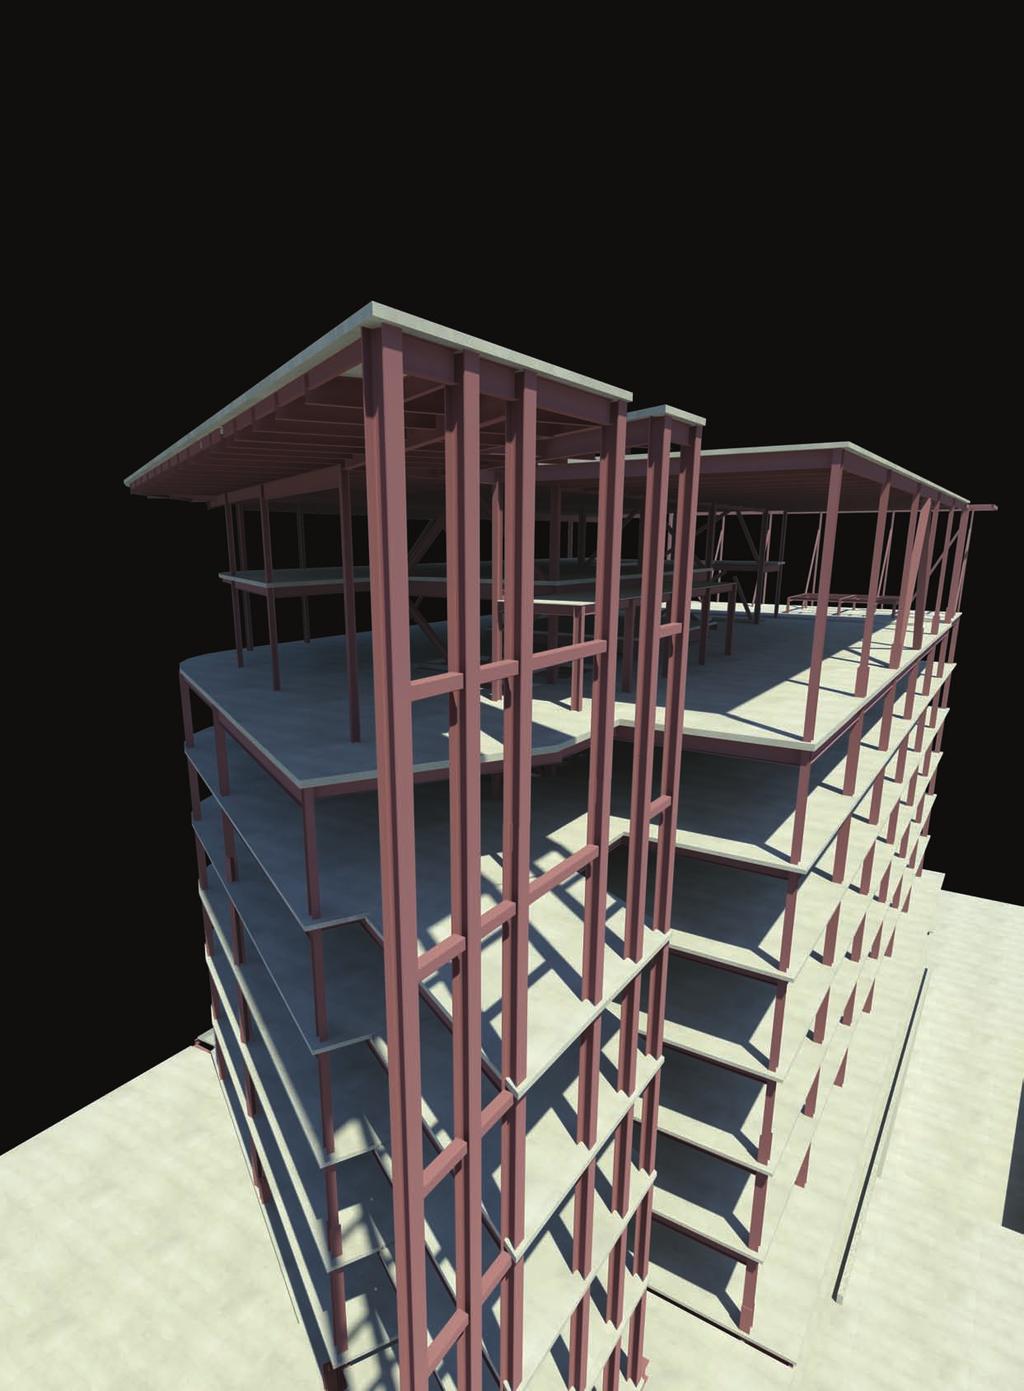 The power of BIM for structural